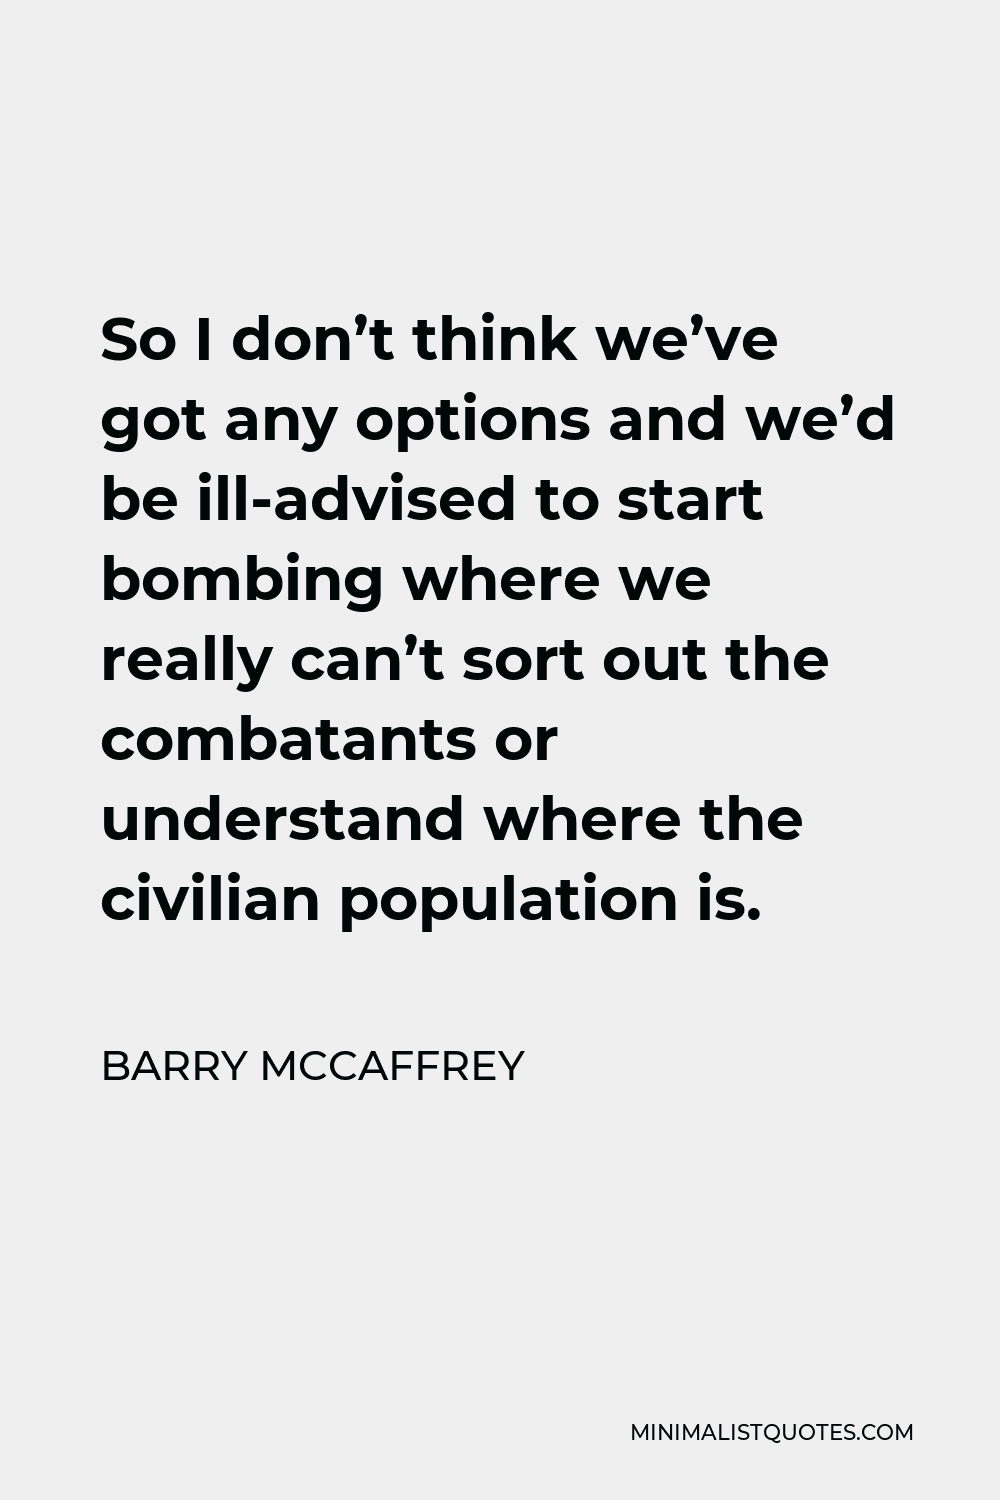 Barry McCaffrey Quote - So I don’t think we’ve got any options and we’d be ill-advised to start bombing where we really can’t sort out the combatants or understand where the civilian population is.